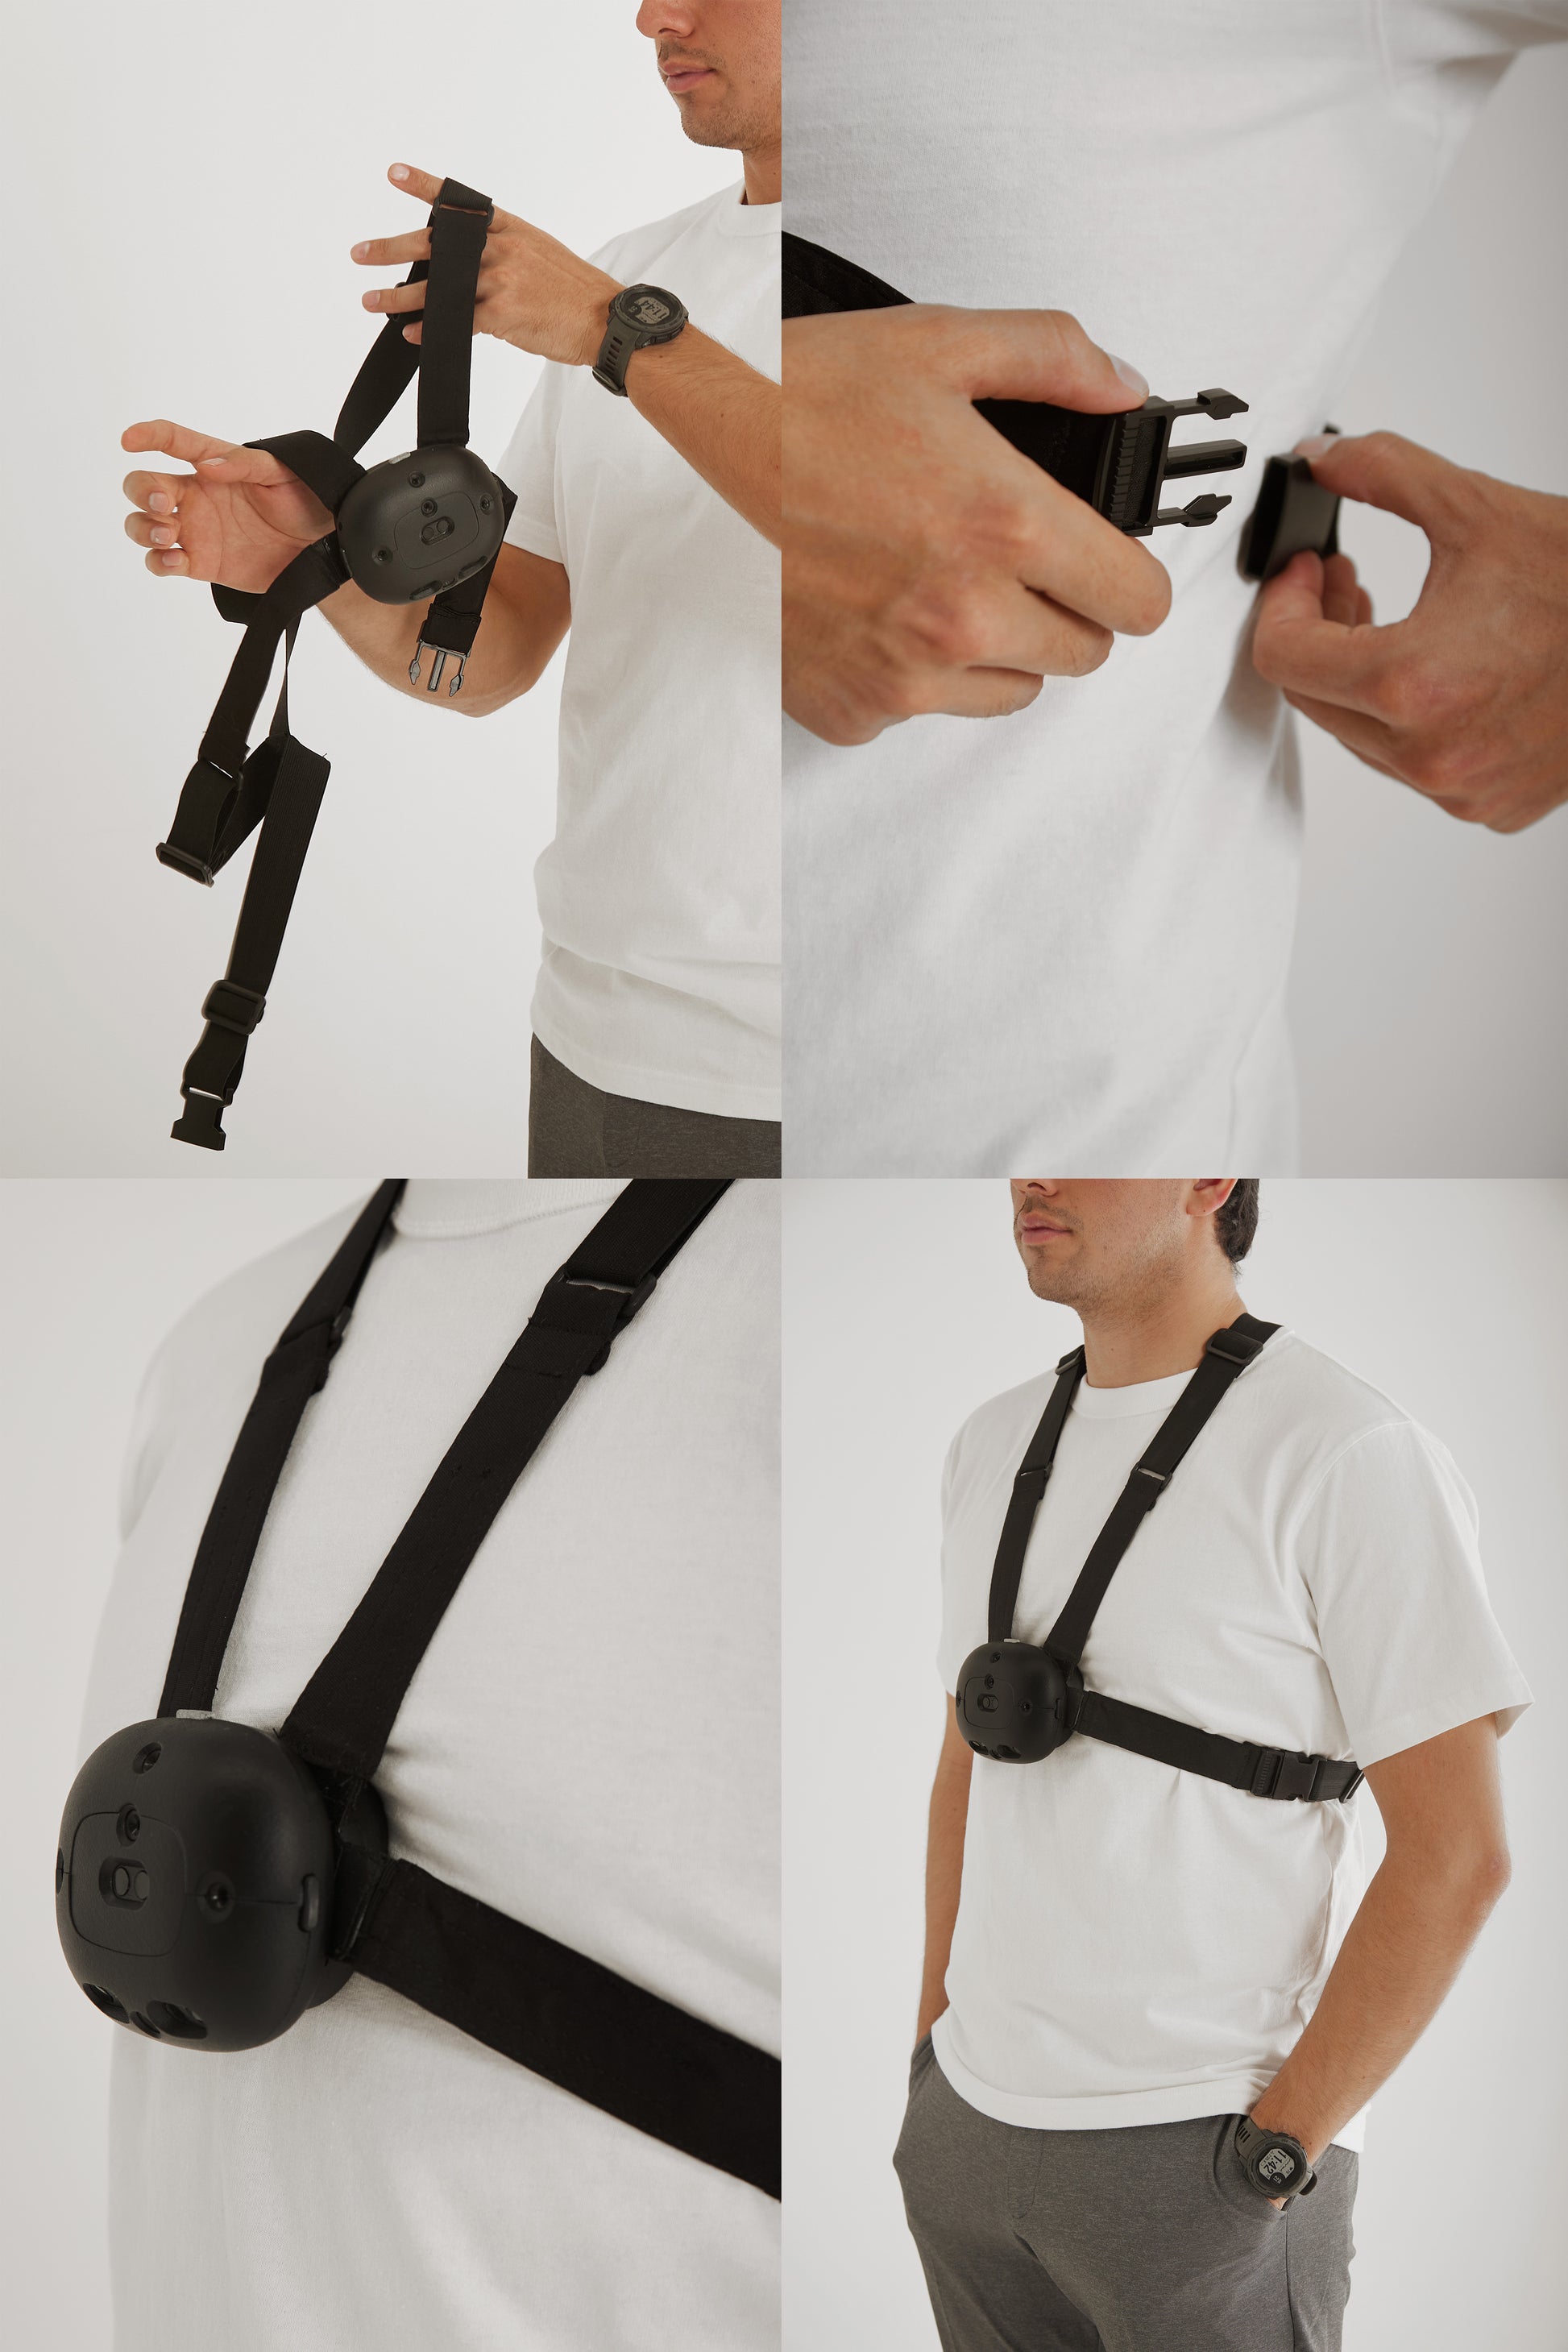 The image is a collage. A man is pictured through he steps of putting on the Ara device. He starts by placing the Ara straps over his head, then buckles it on the left side.